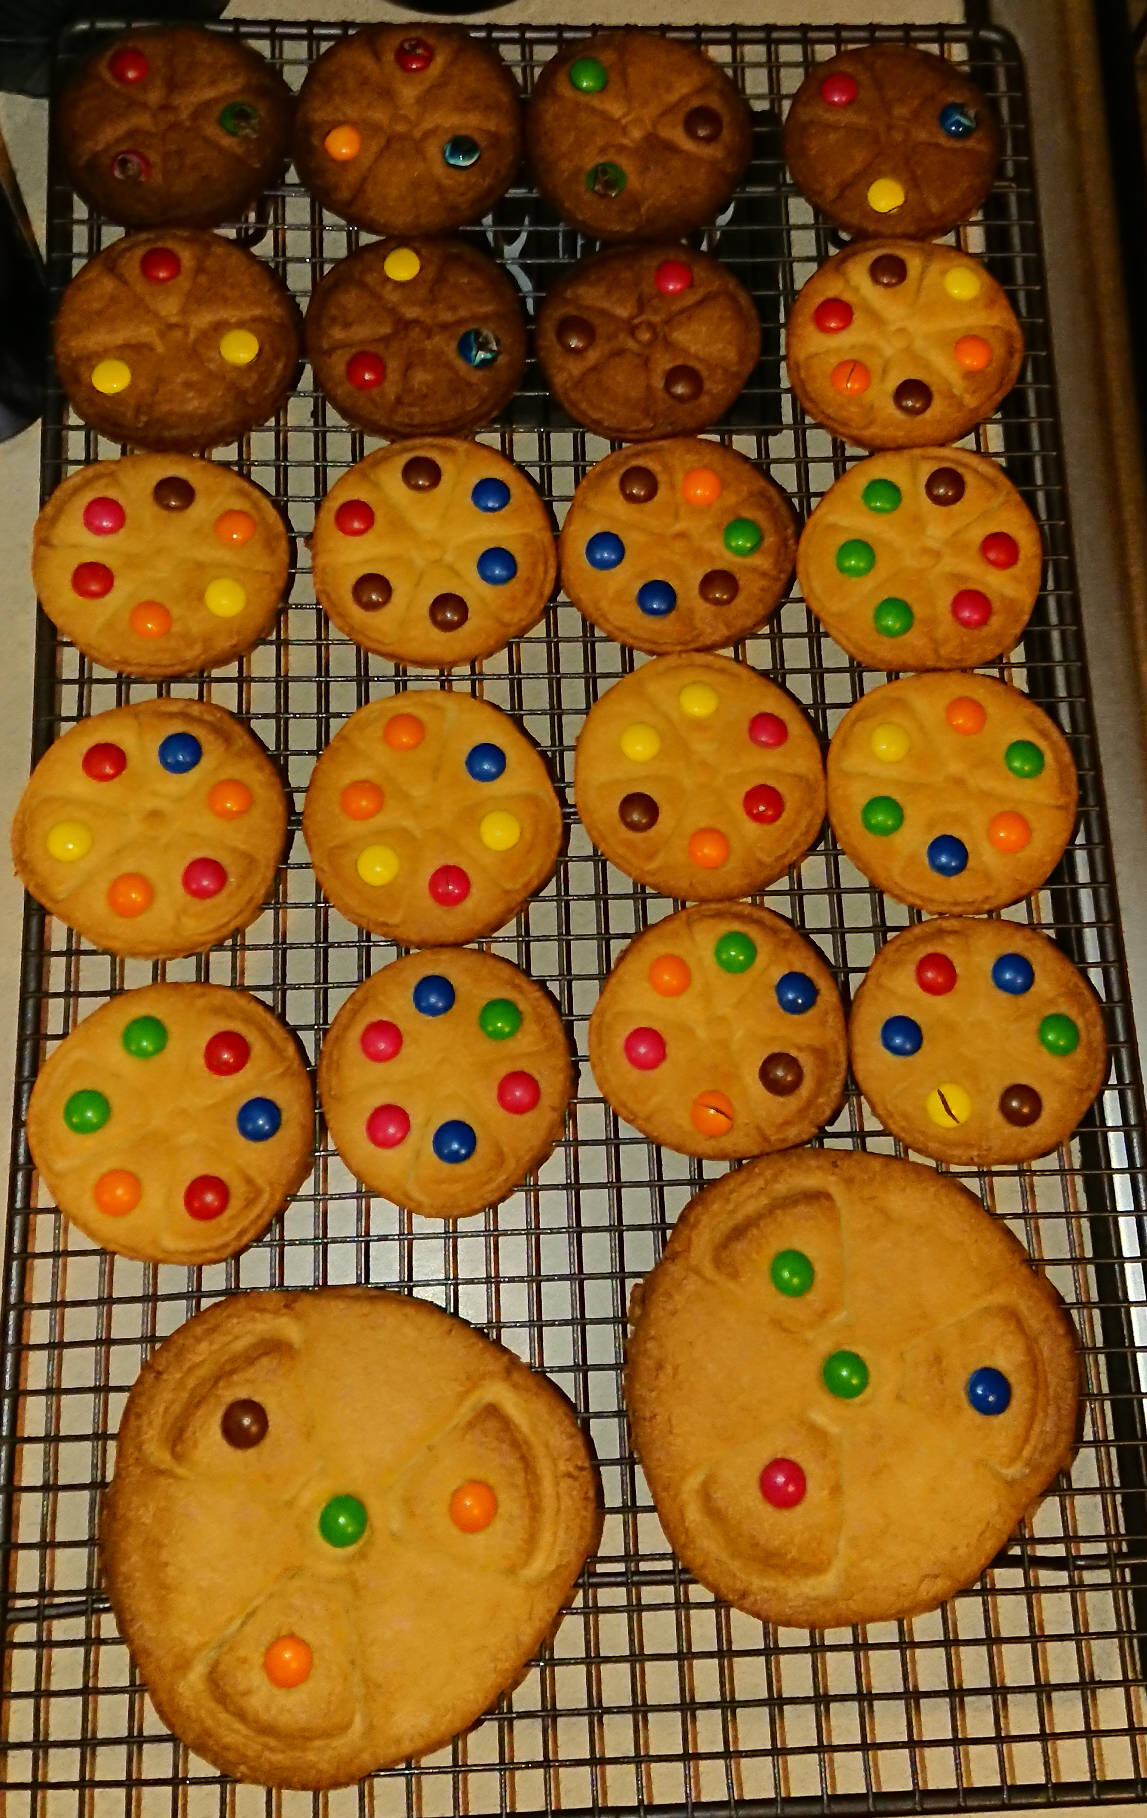 Radiation symbol cookies, baked a bit too long